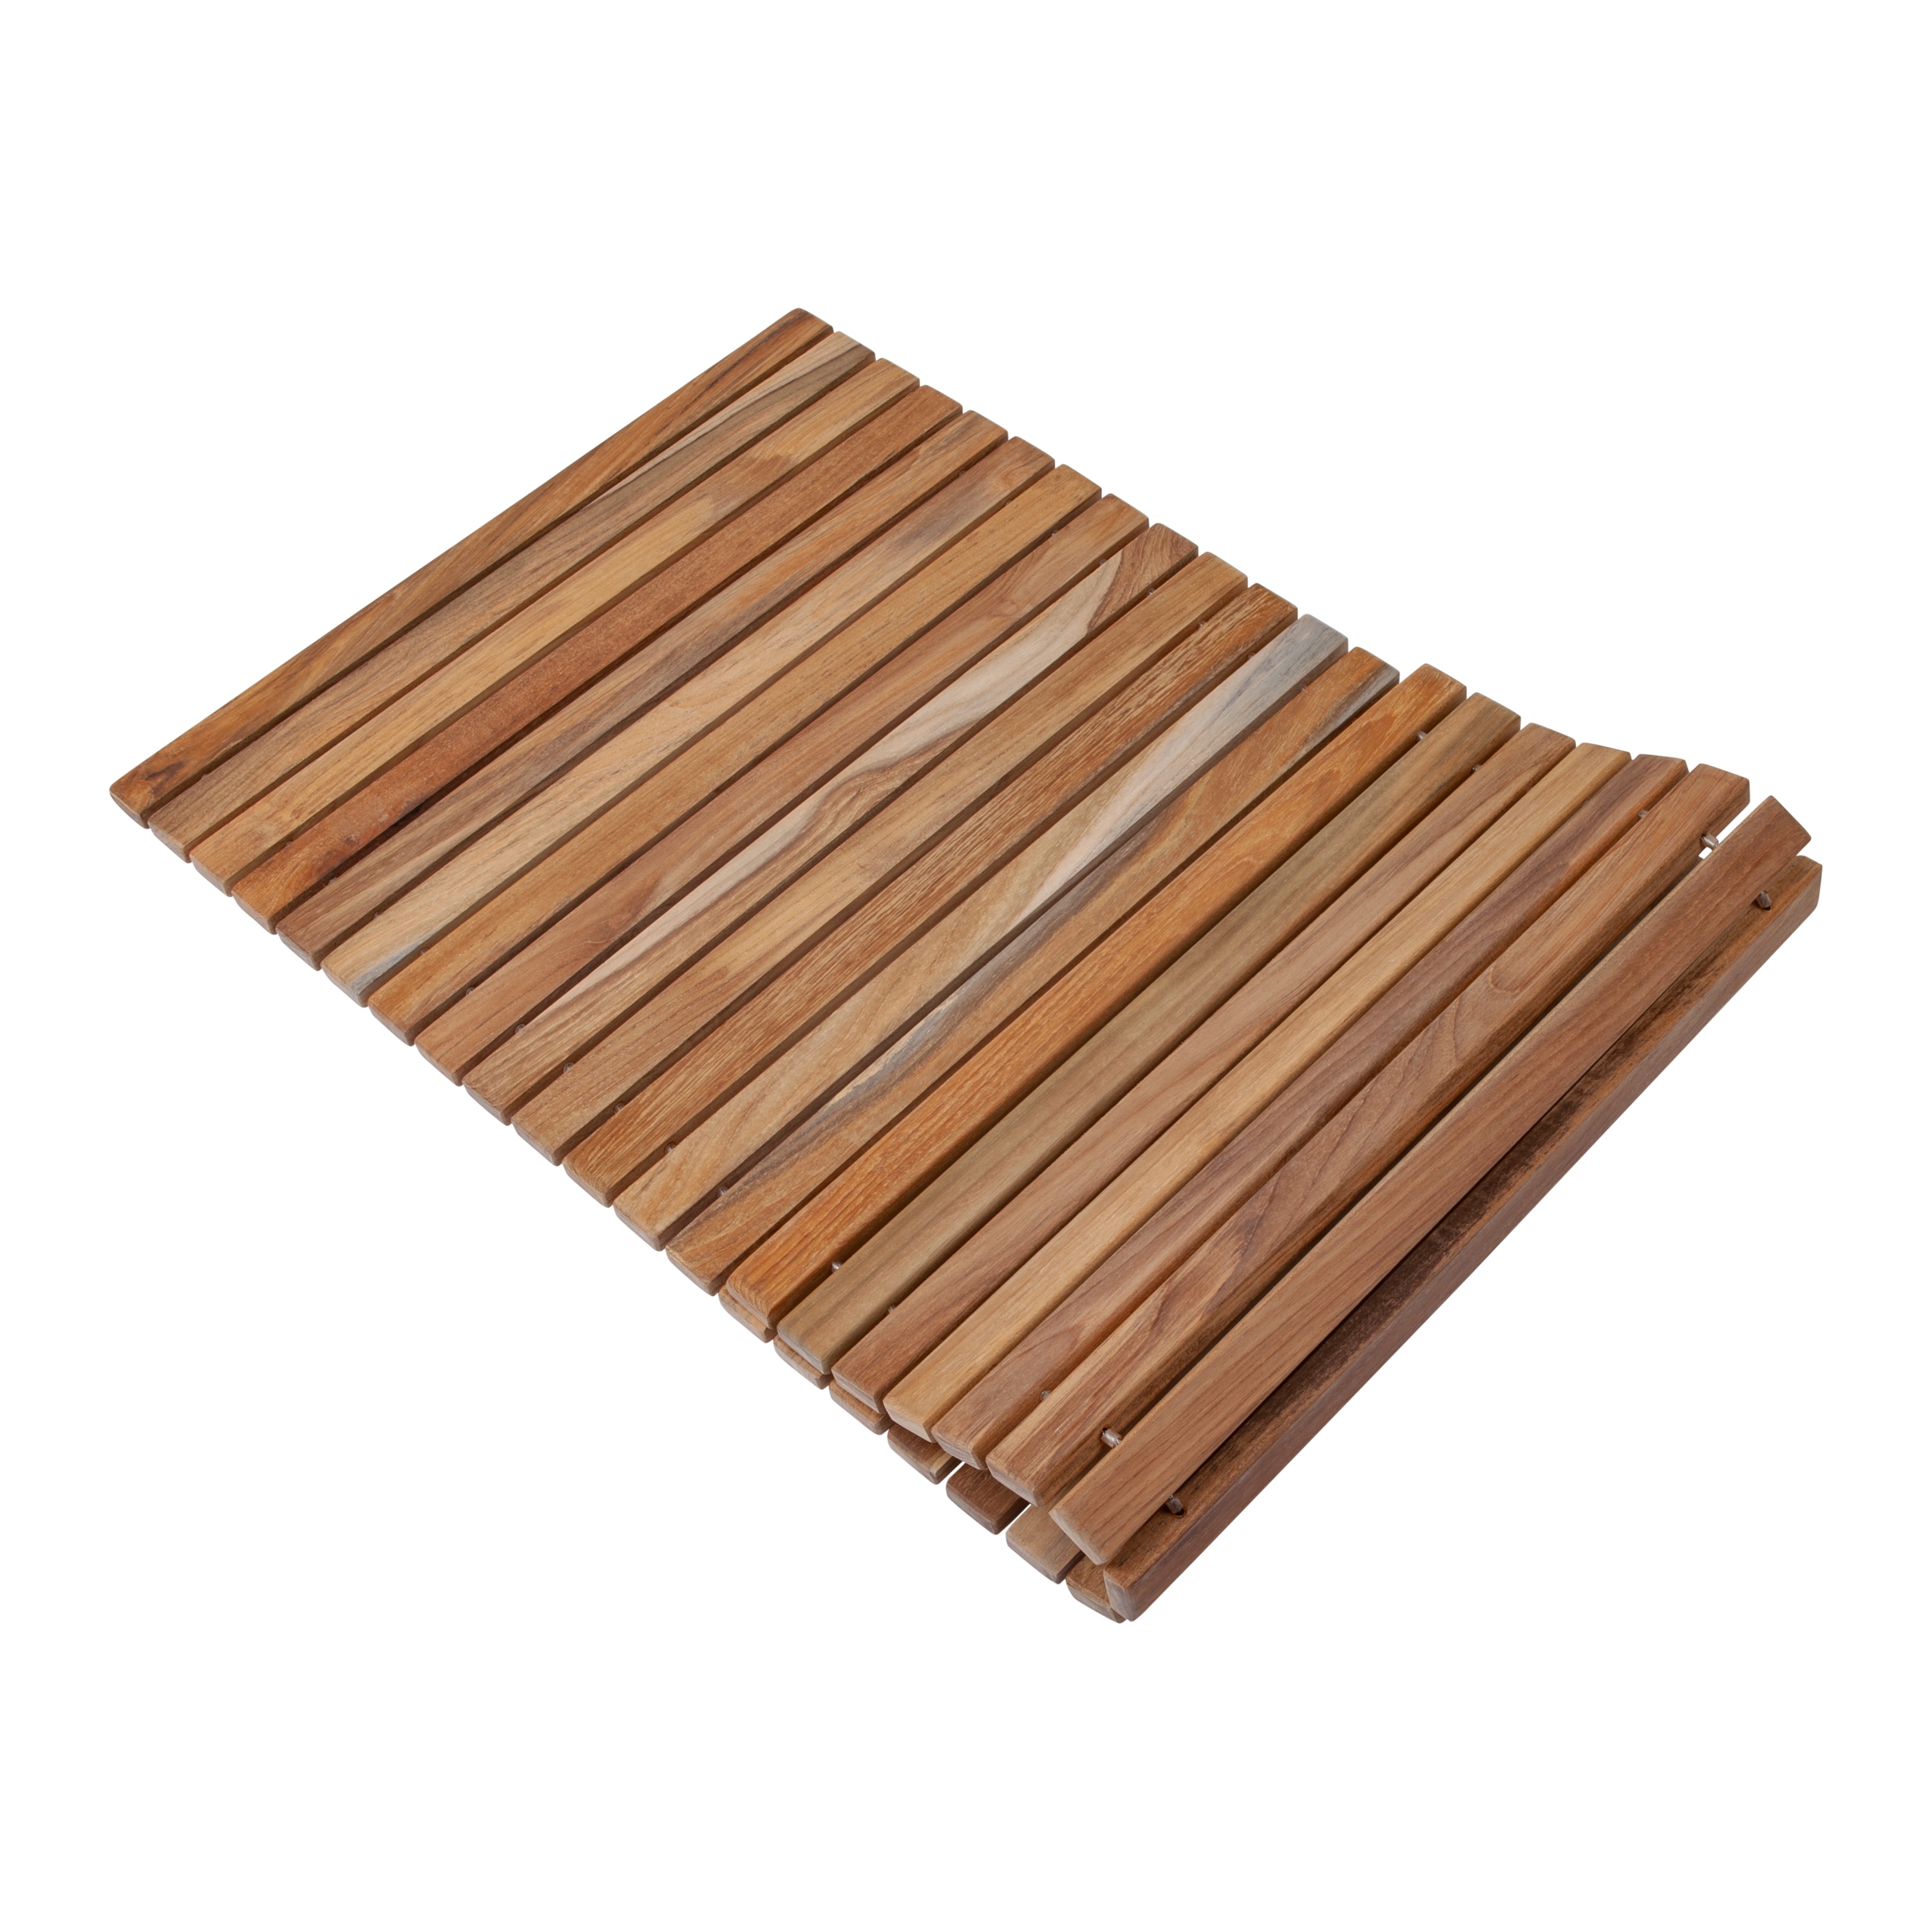 https://ak1.ostkcdn.com/images/products/is/images/direct/78da4fe56f23454410e9077519f397715ed56843/Nordic-Style-Premium-Natural-Teak-String-Shower-Mat-40in.jpg